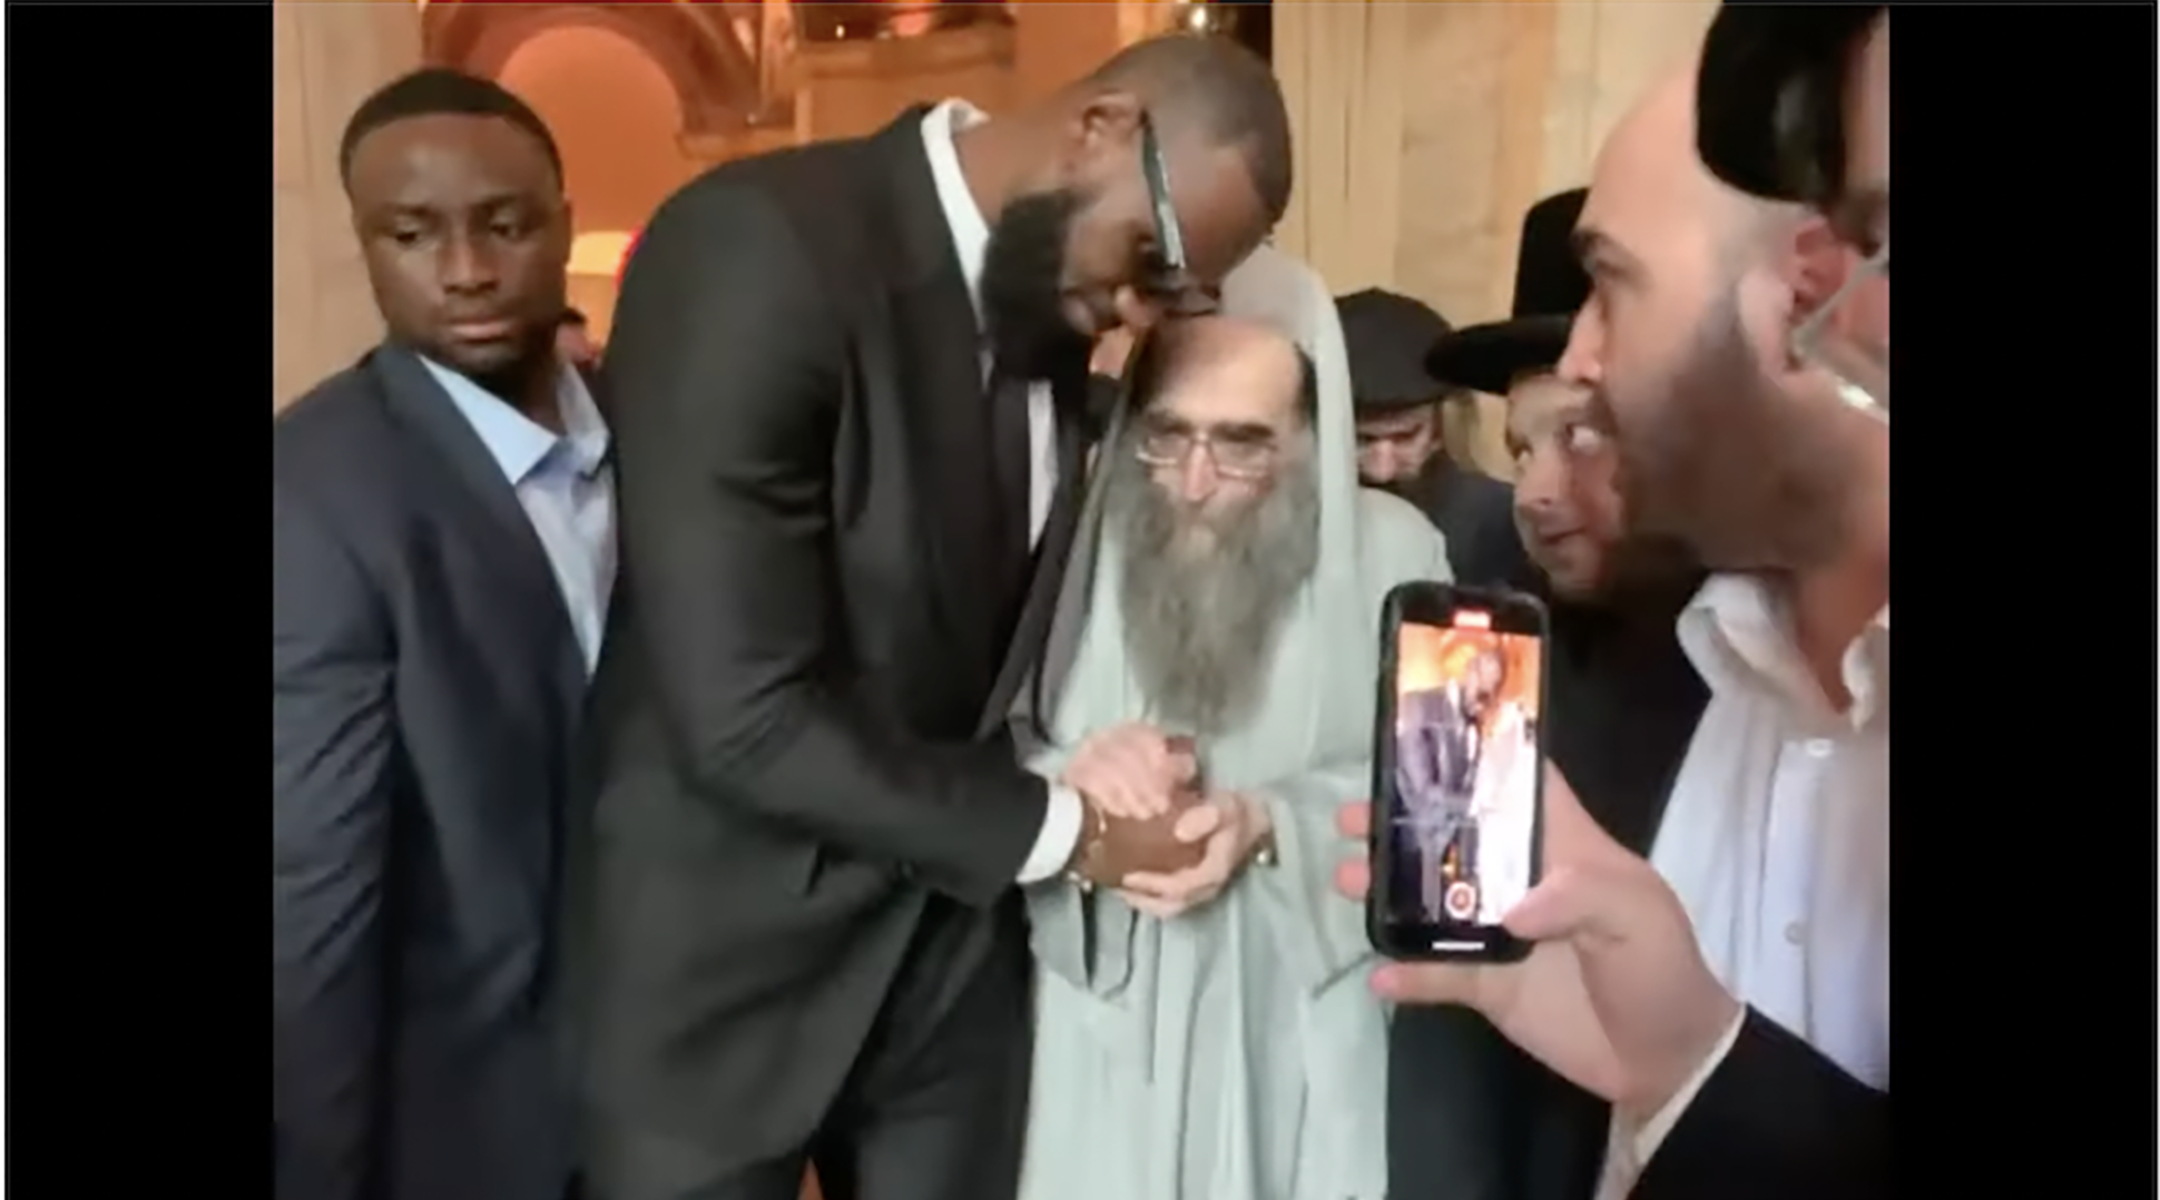 LeBron James attends Jewish NYC wedding — holding hands with a notorious rabbi